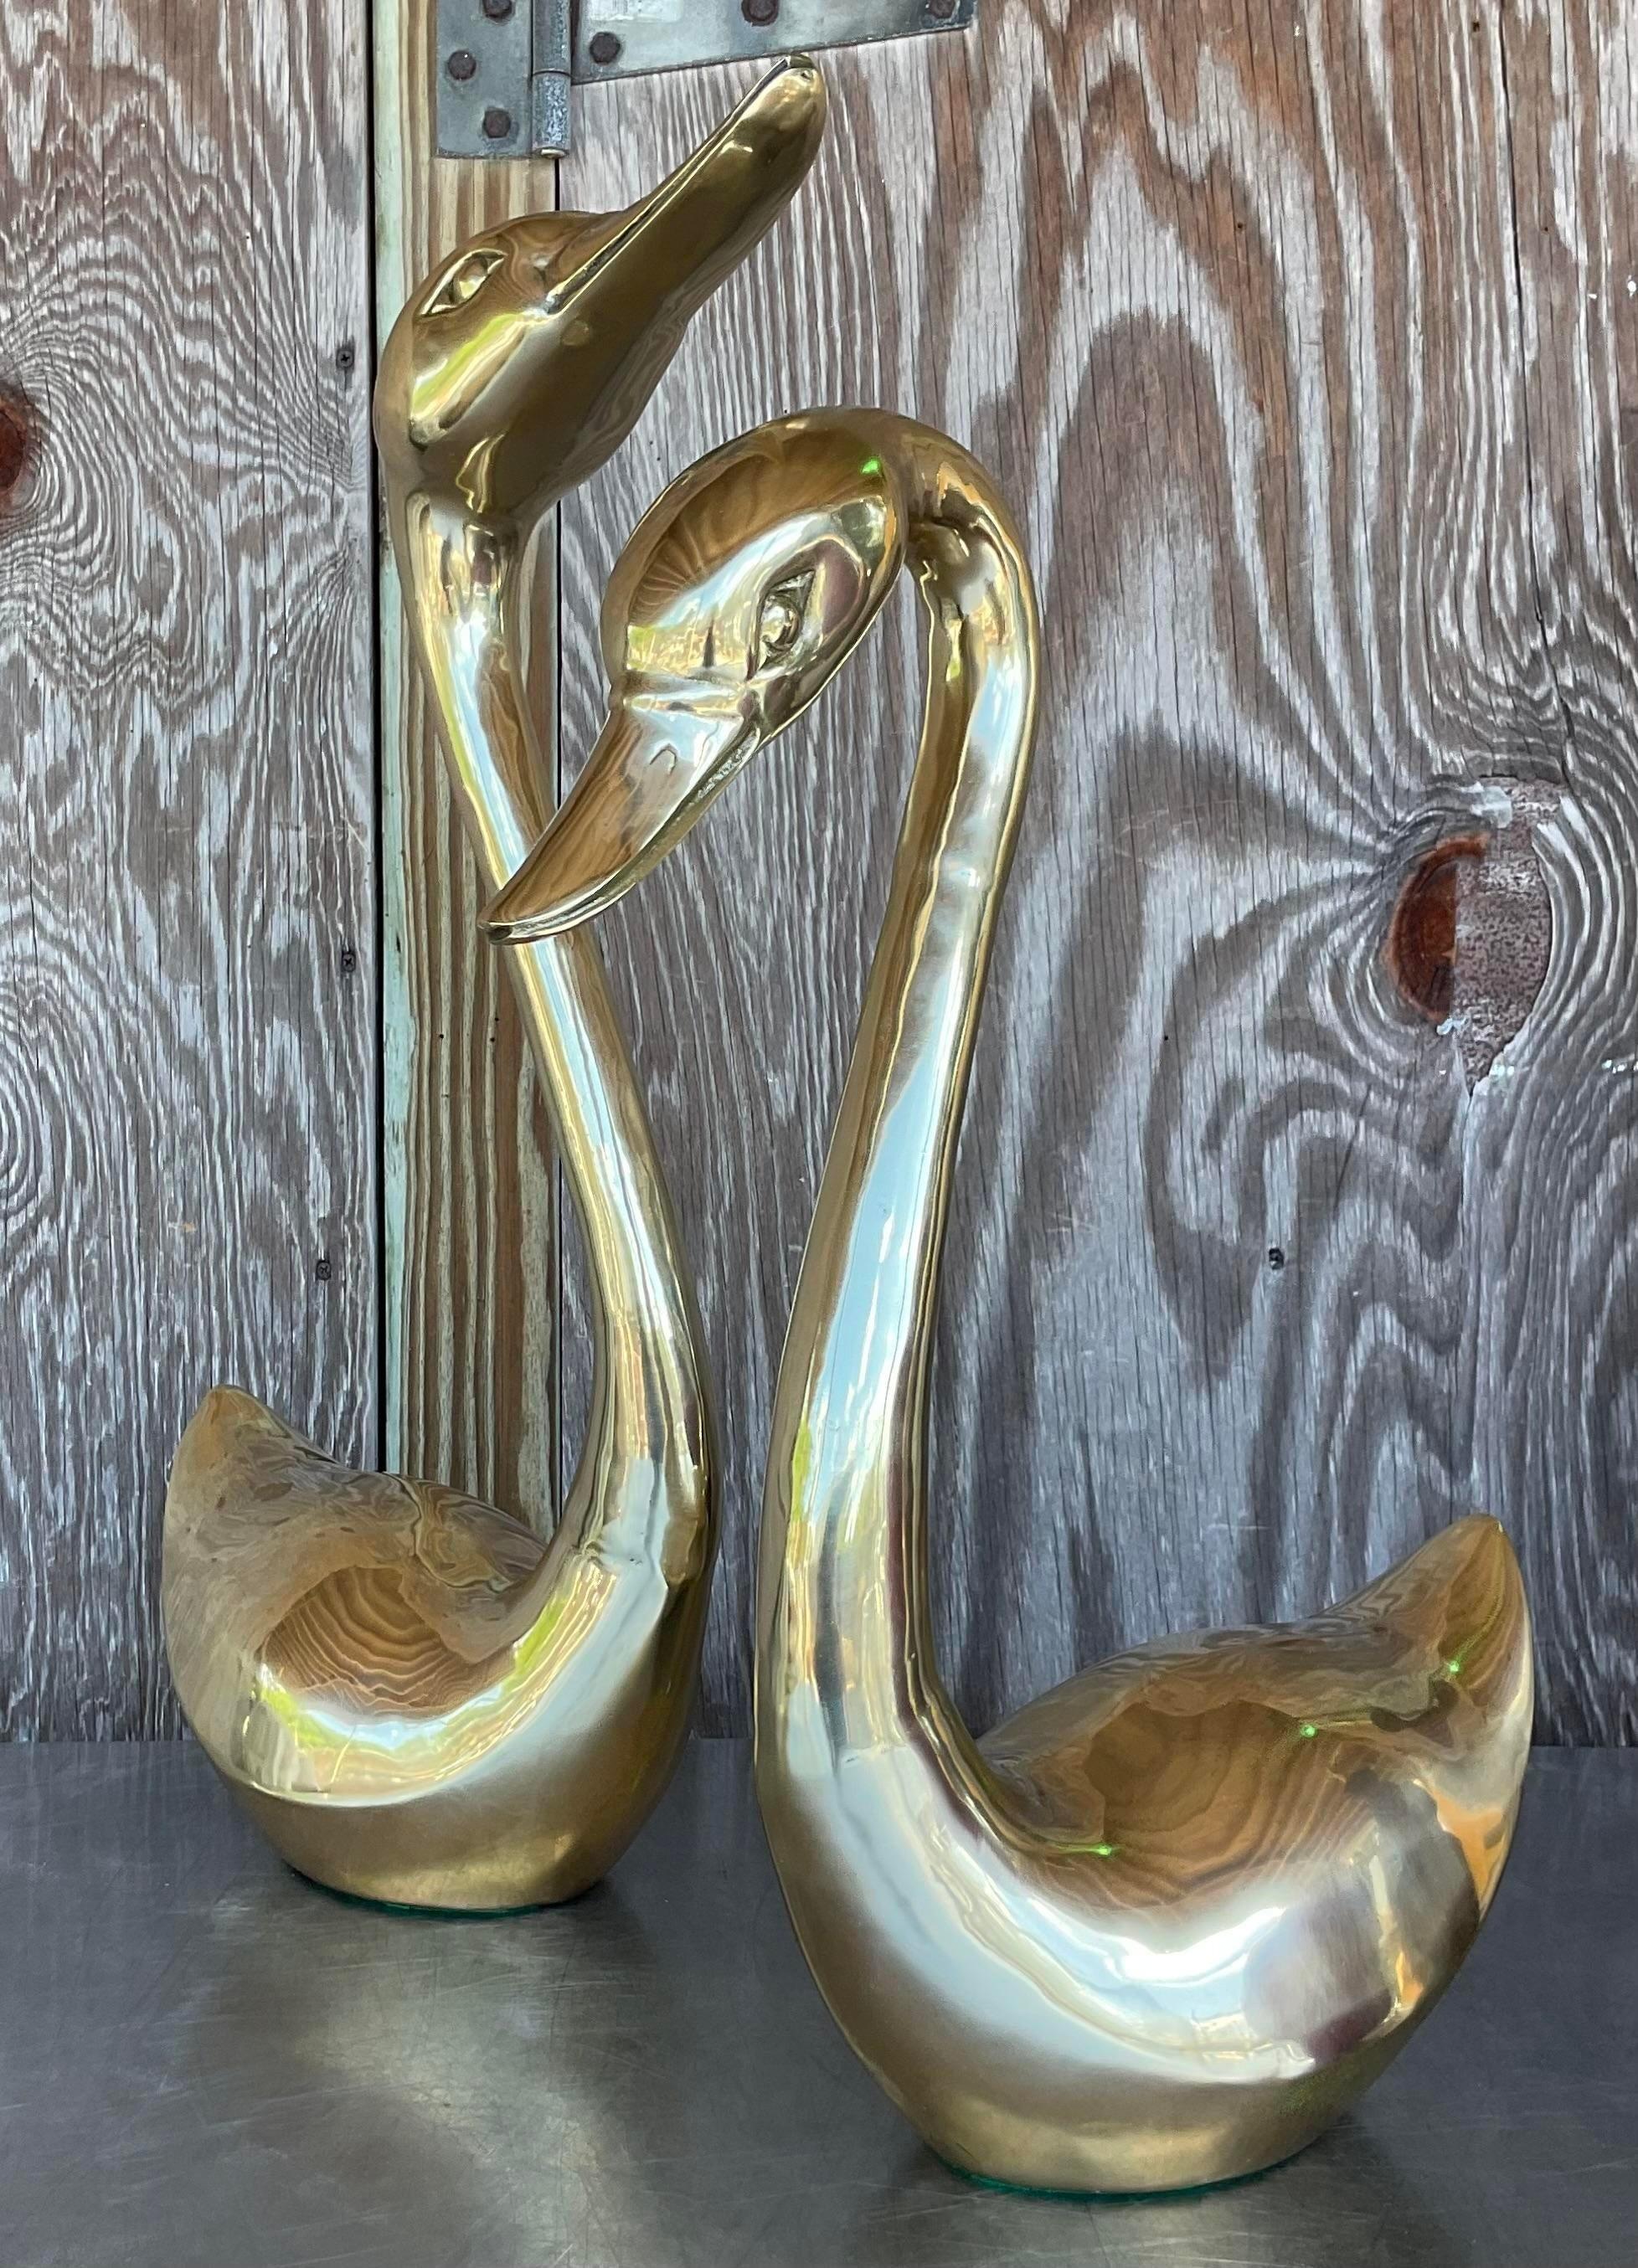 Elevate your décor with this charming pair of Vintage Regency Solid Brass Ducks, embodying quintessential American craftsmanship and timeless appeal for a touch of classic elegance in any setting.